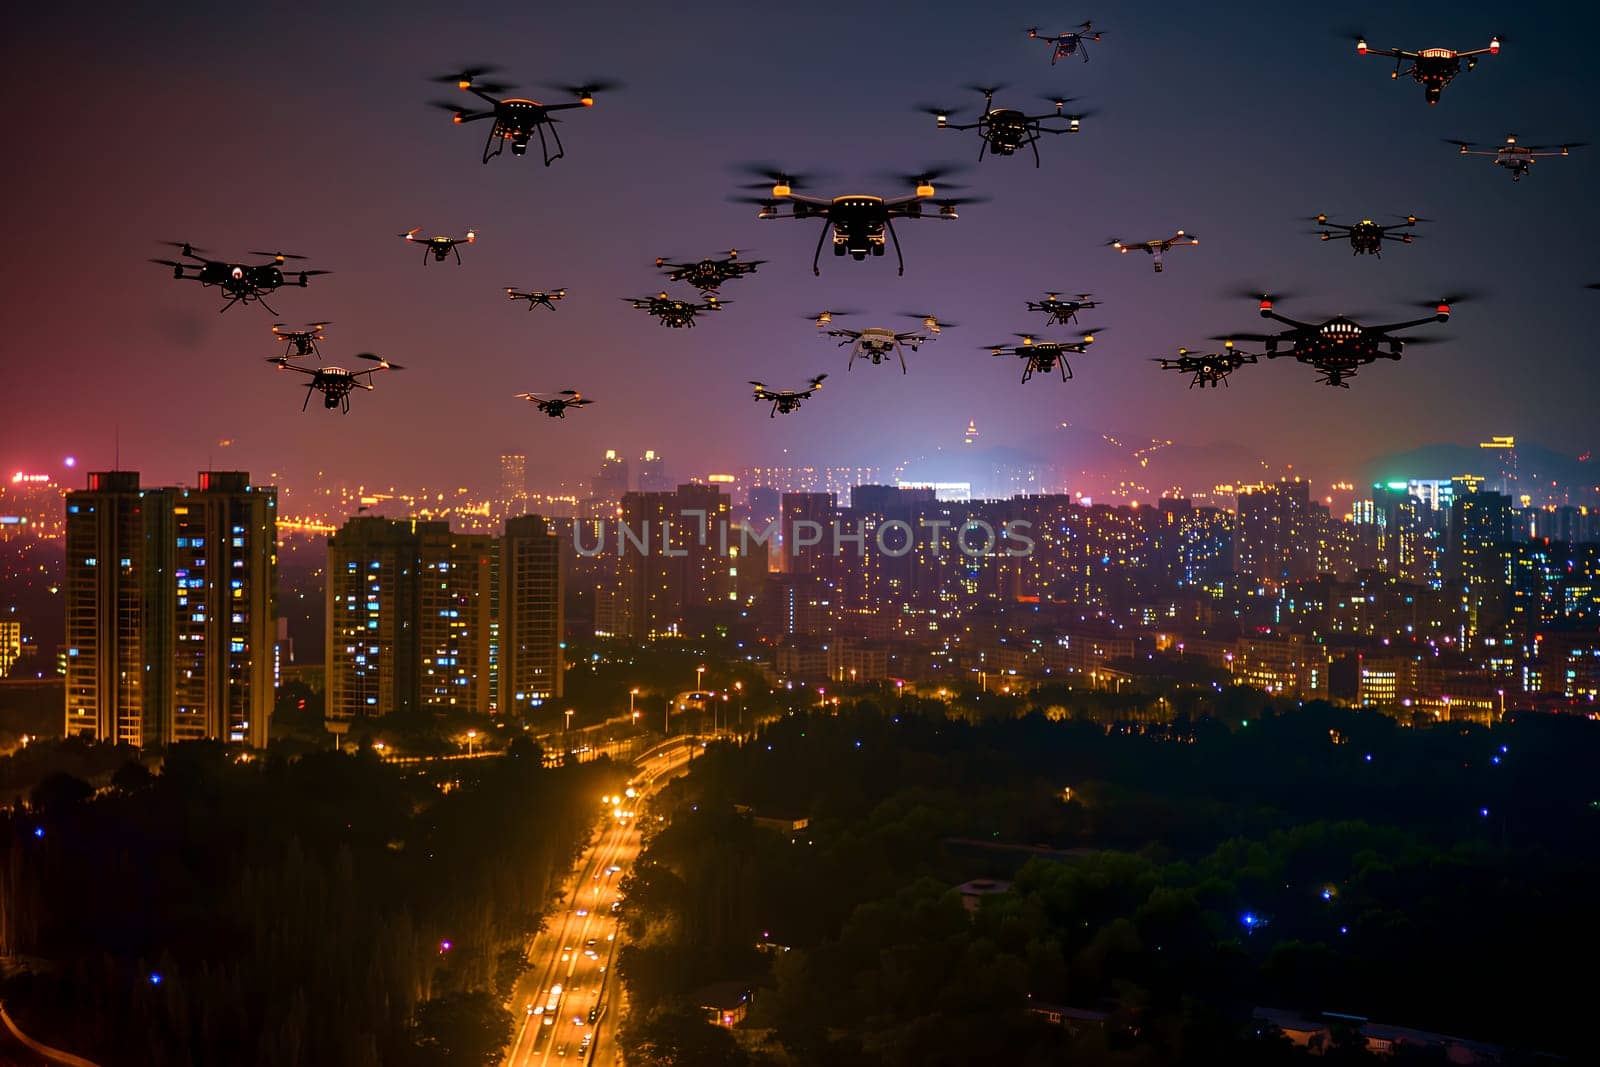 Group of drones over city at summer night. Neural network generated image. Not based on any actual scene or pattern.